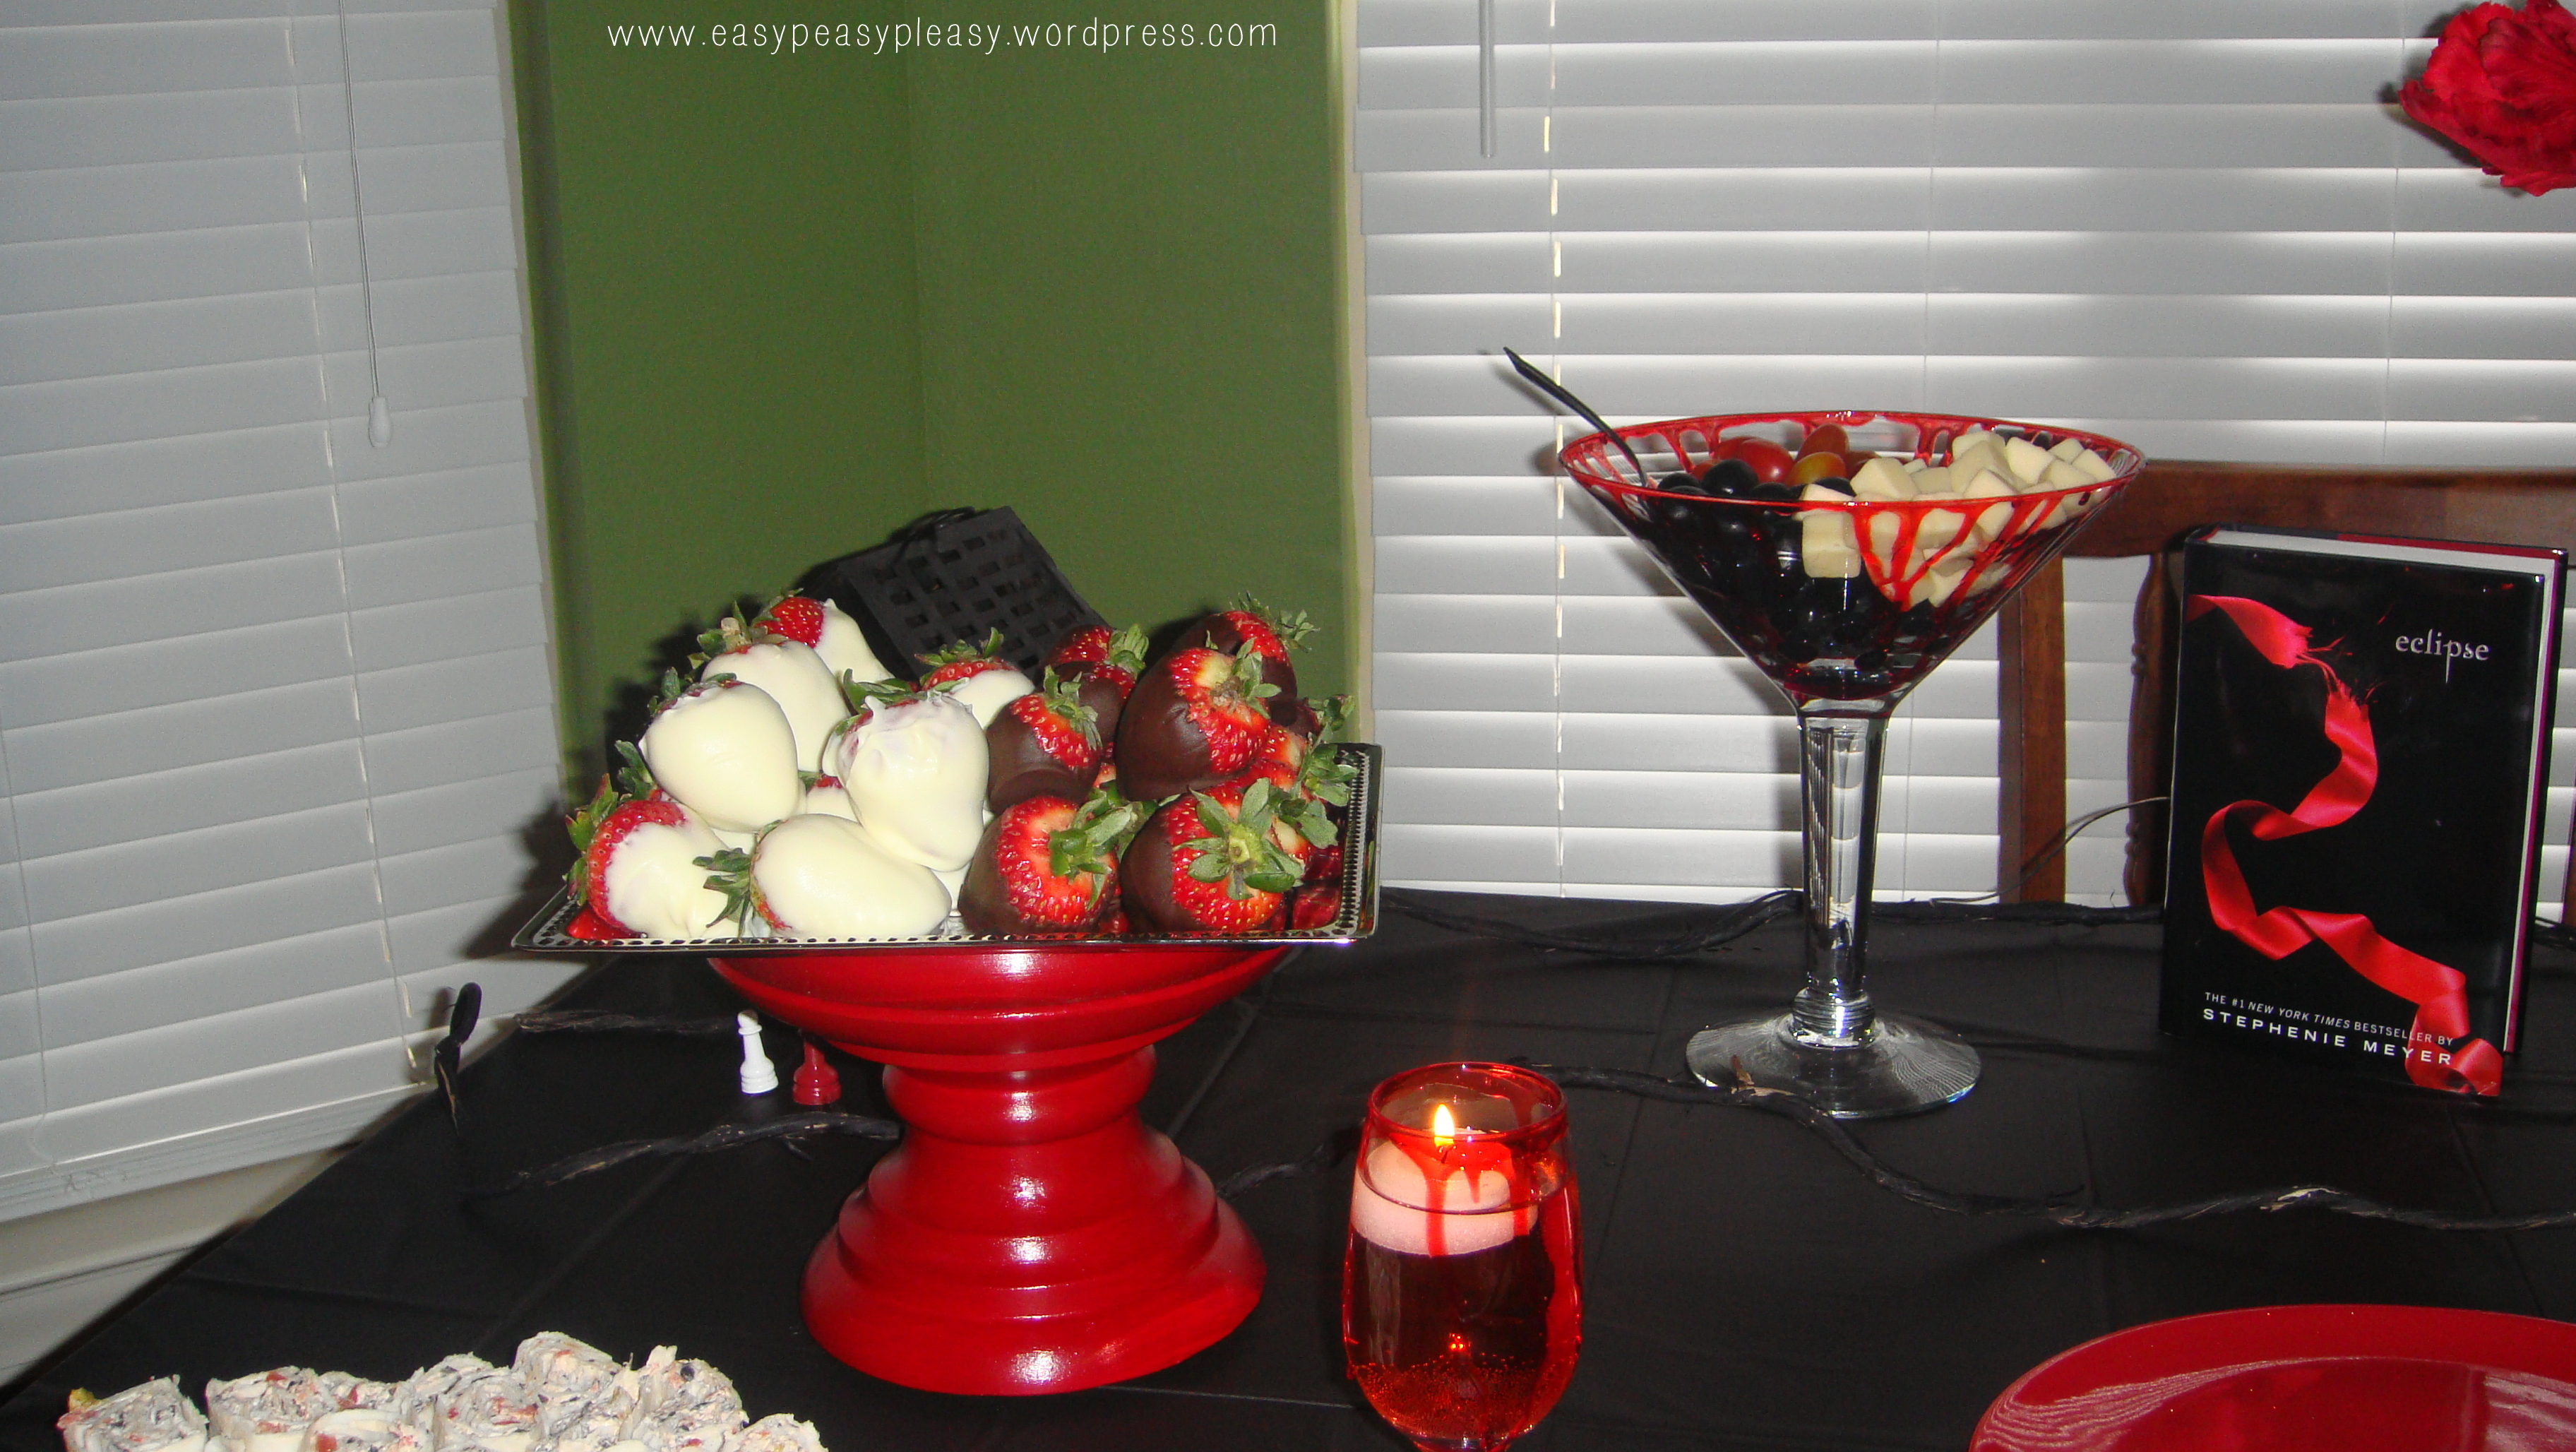 Twilight Party Foods that match the decor